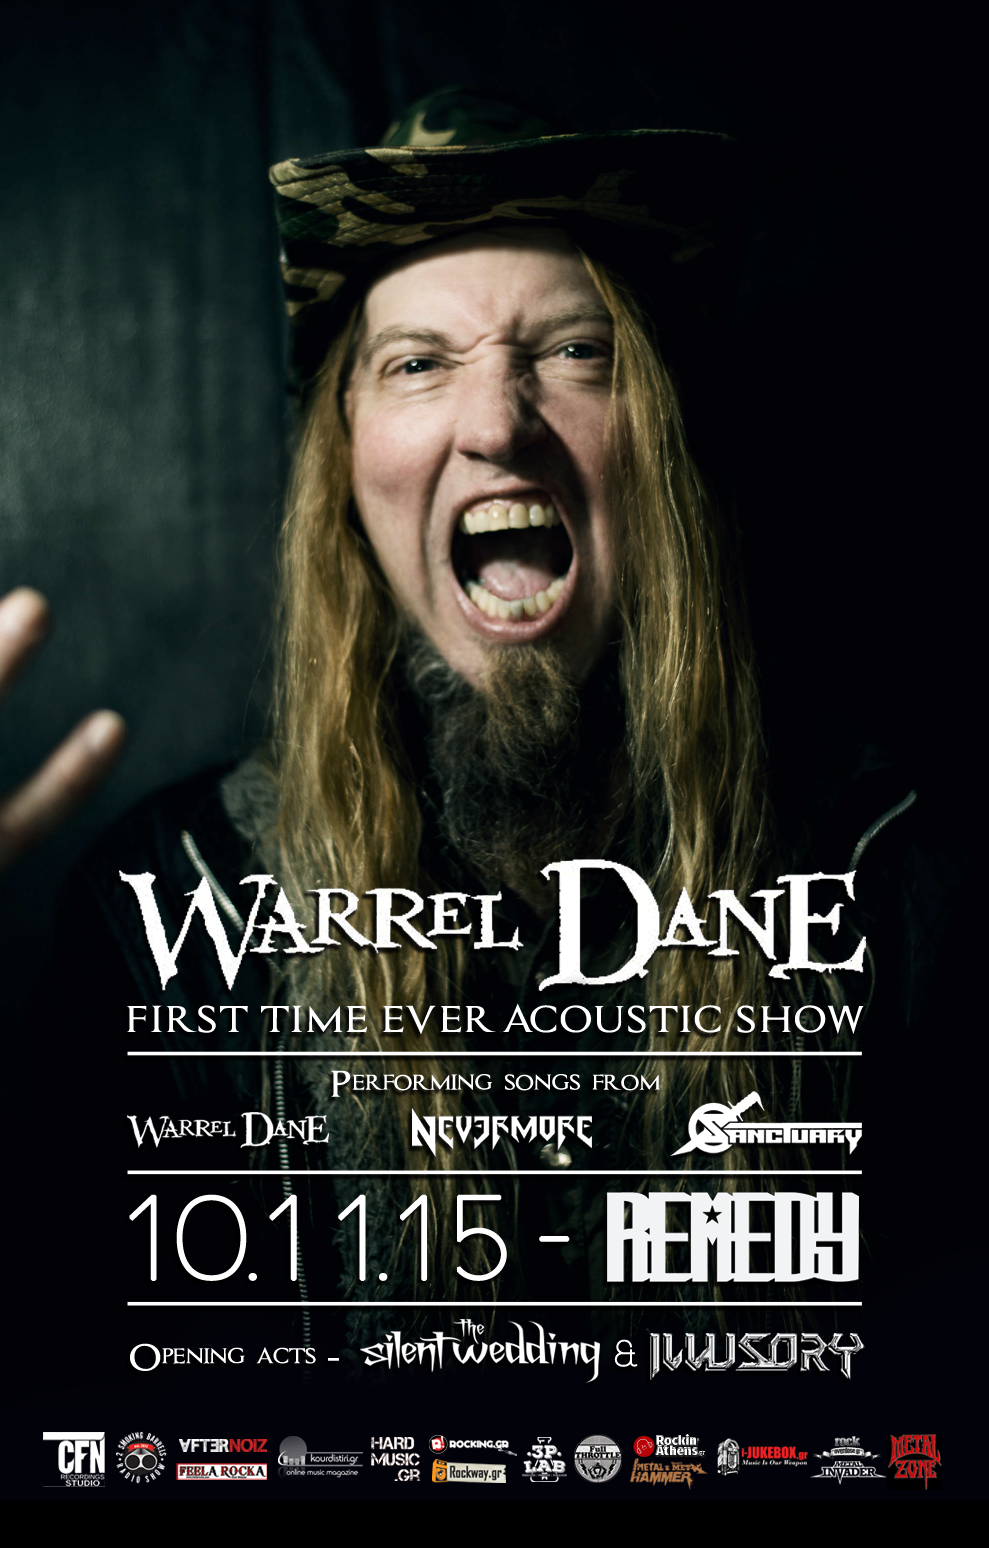 10.11.2015 – Warrel Dane (first time ever acoustic show) / Opening acts: The Silent Wedding & Illusory